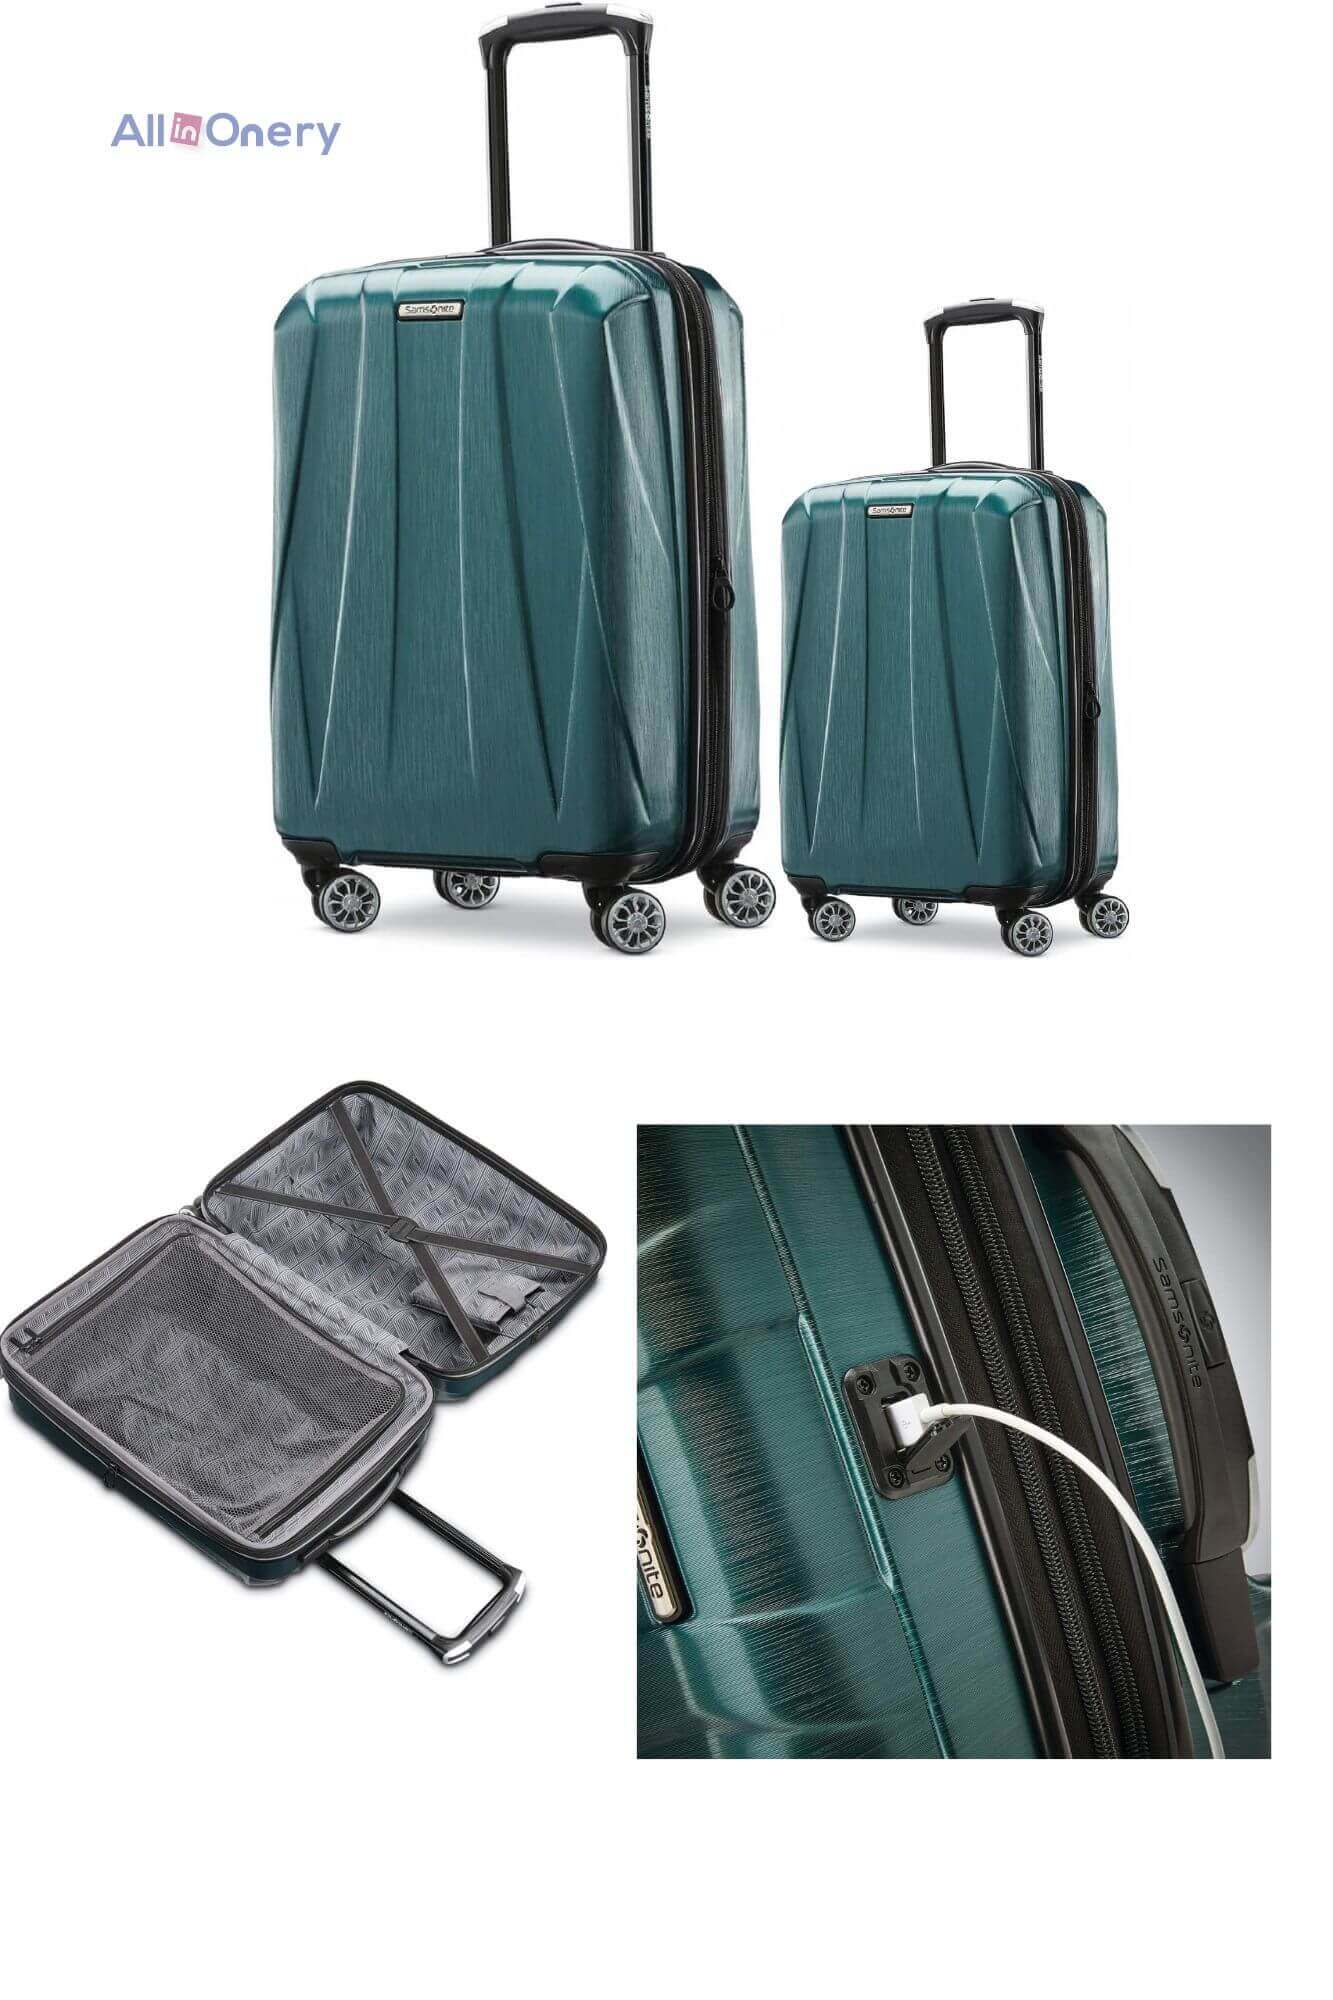 Samsonite Centric 2 Carry-On 20-inch Hardside Expandable Luggage with Spinners